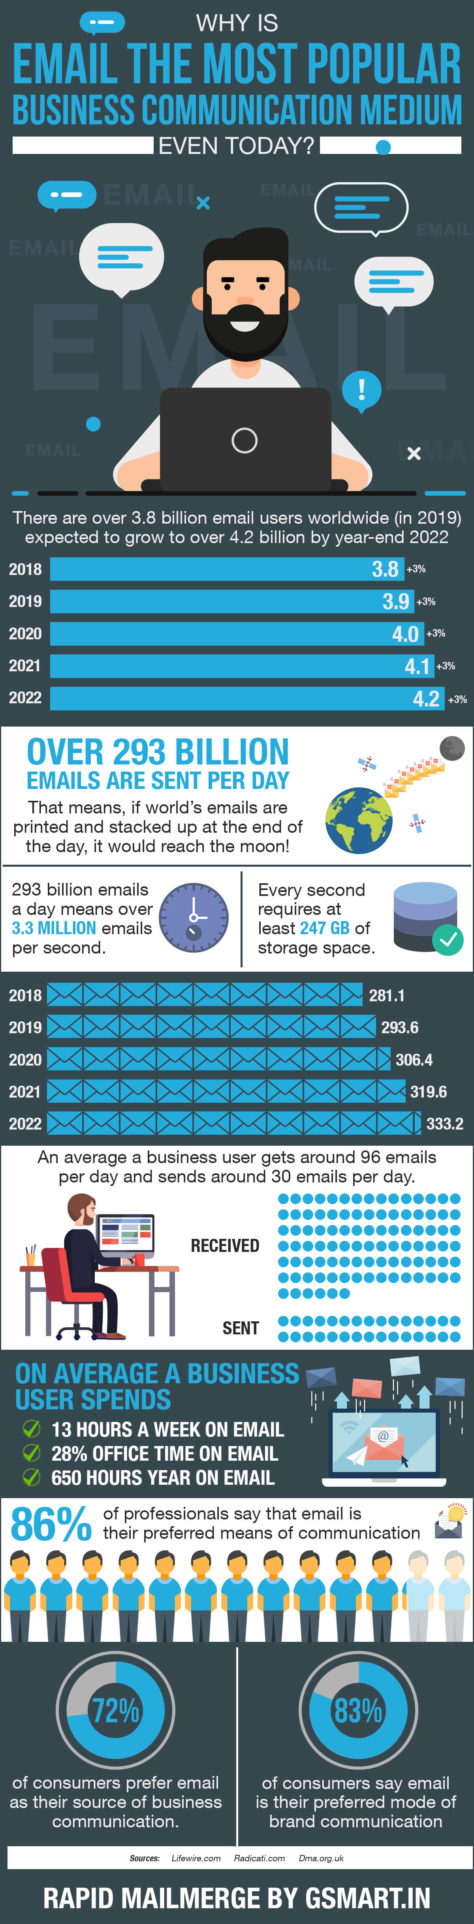 Why is email still so popular? These Statistics tells us